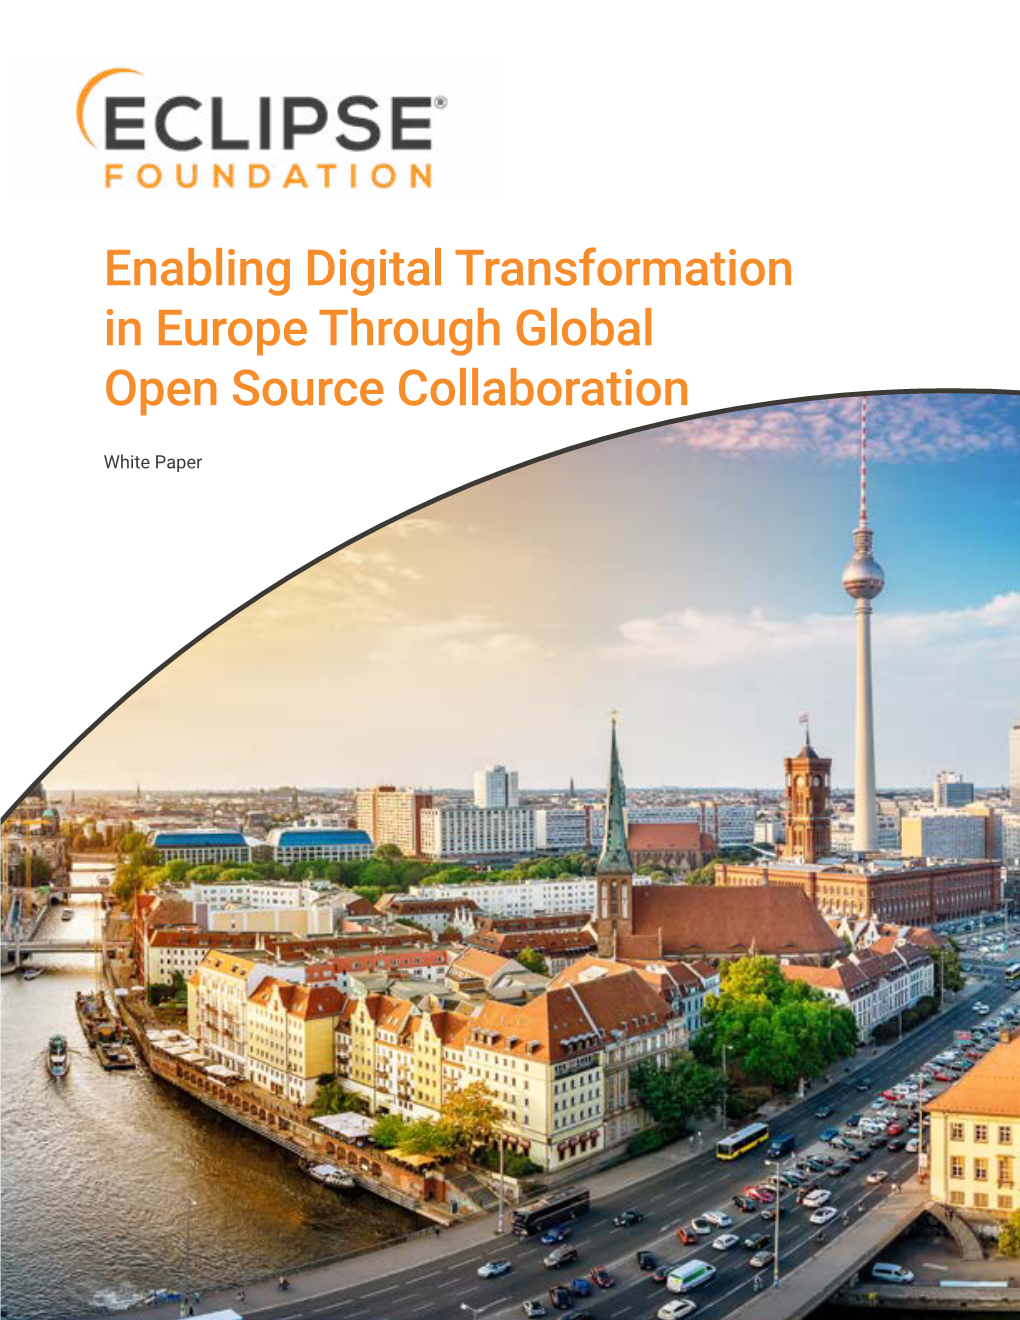 Enabling Digital Transformation in Europe Through Global Open Source Collaboration